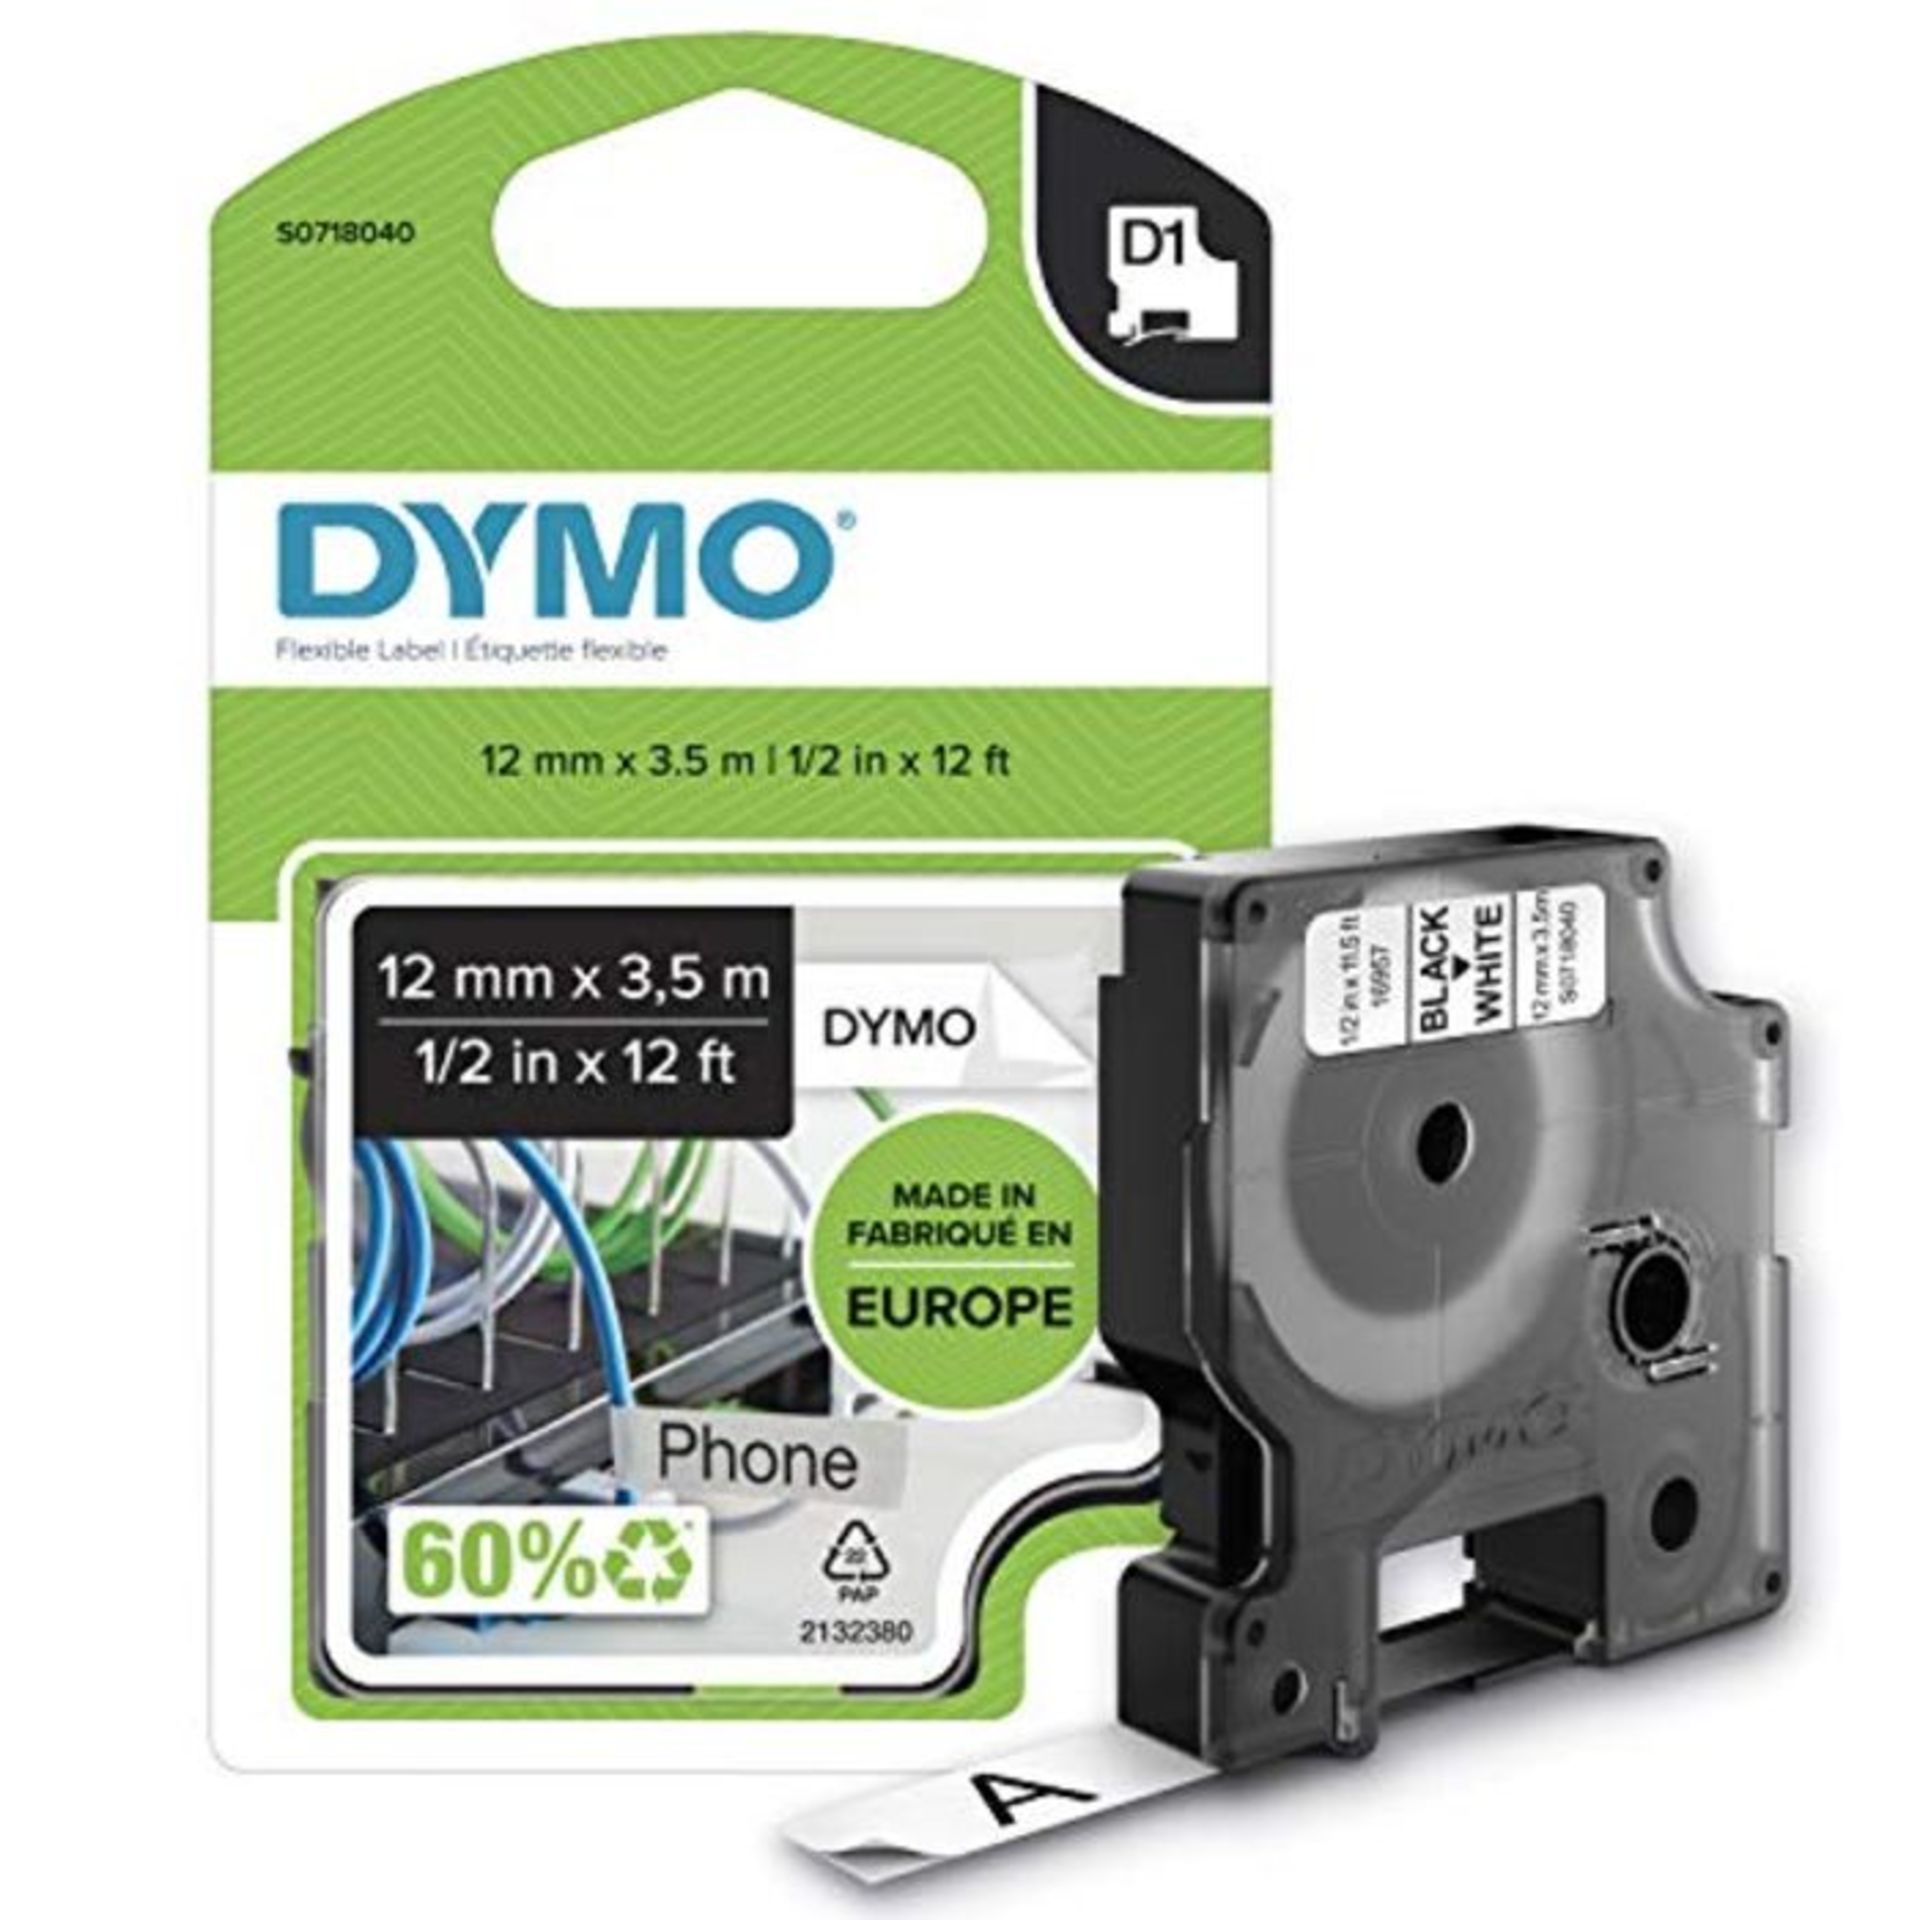 DYMO D1 Labels, 12 mm x 3.5 m Roll, Black Print on White, Self-Adhesive Labels for Lab